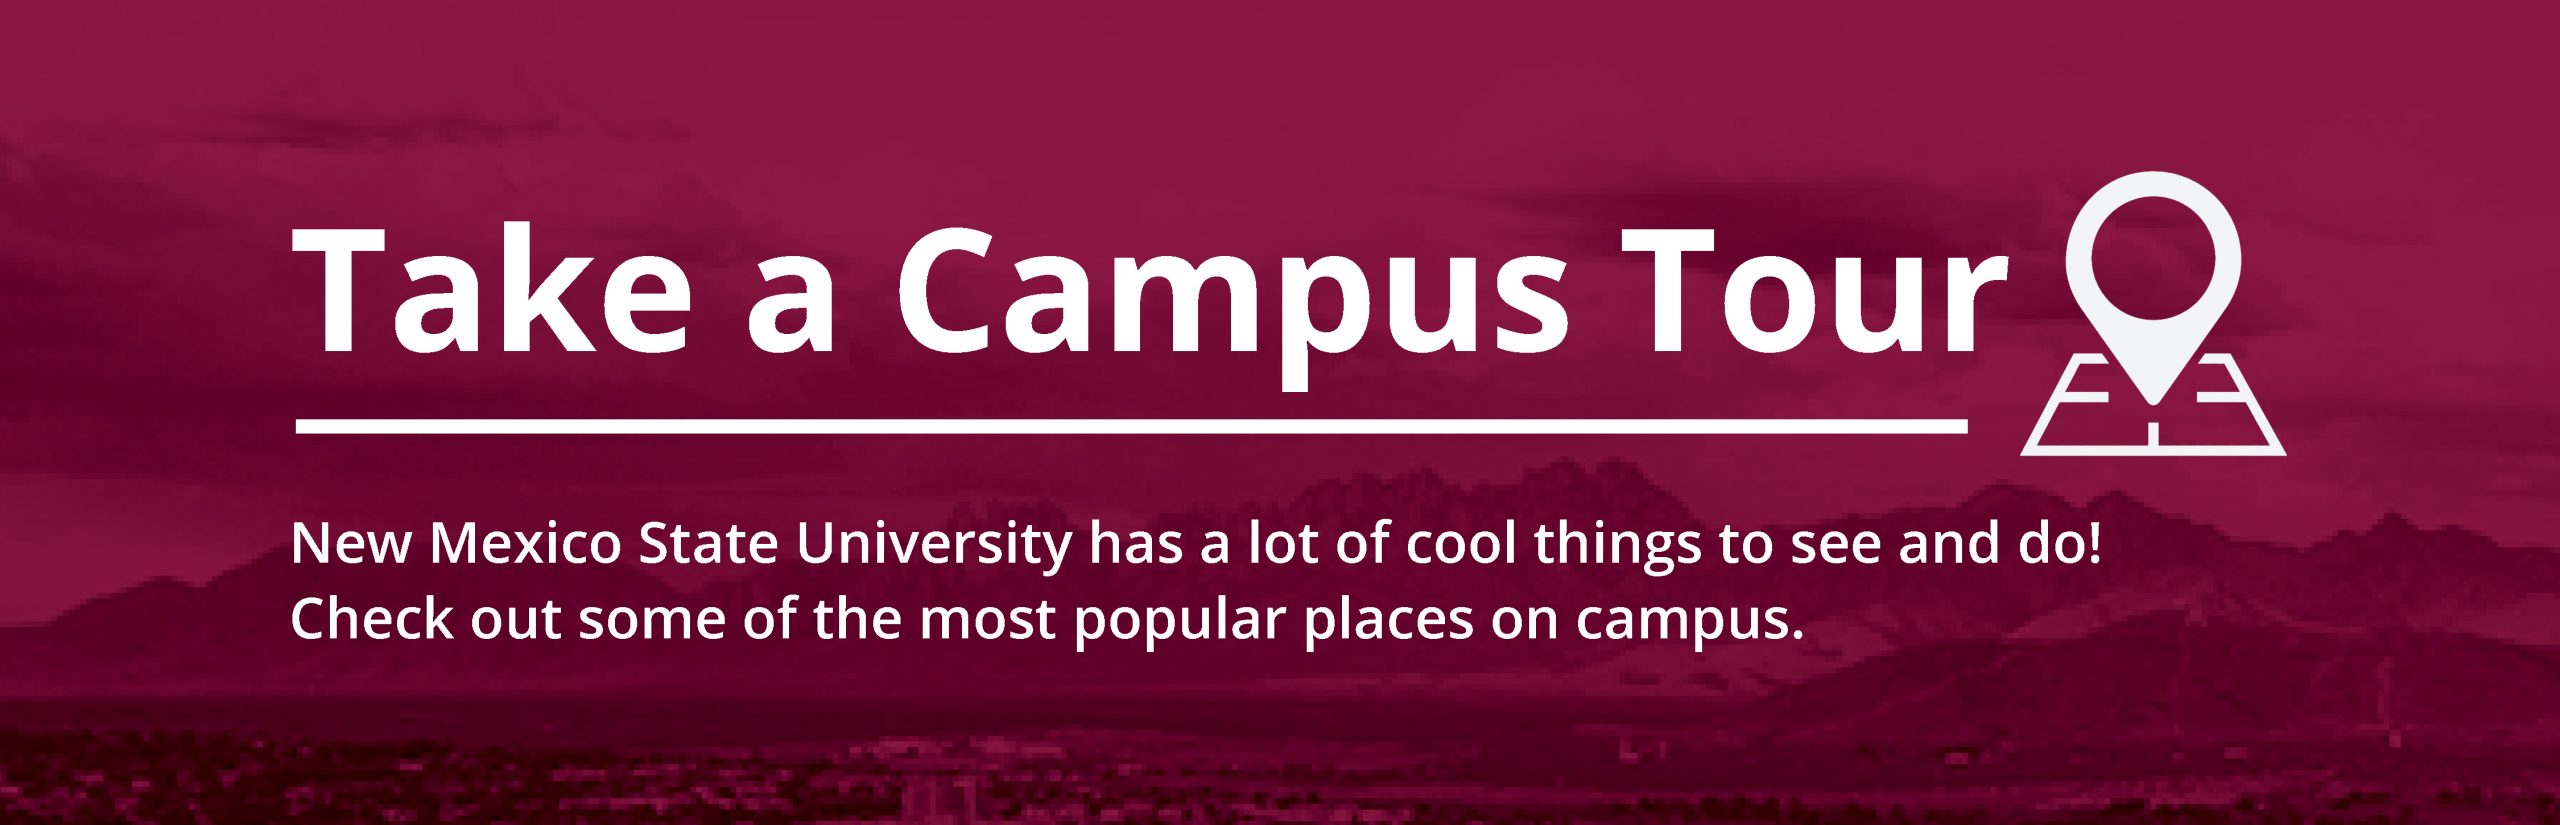 Take a campus tour, NMSU has a lot of cool things to see and do! Check out some of the most popular places on campus. 